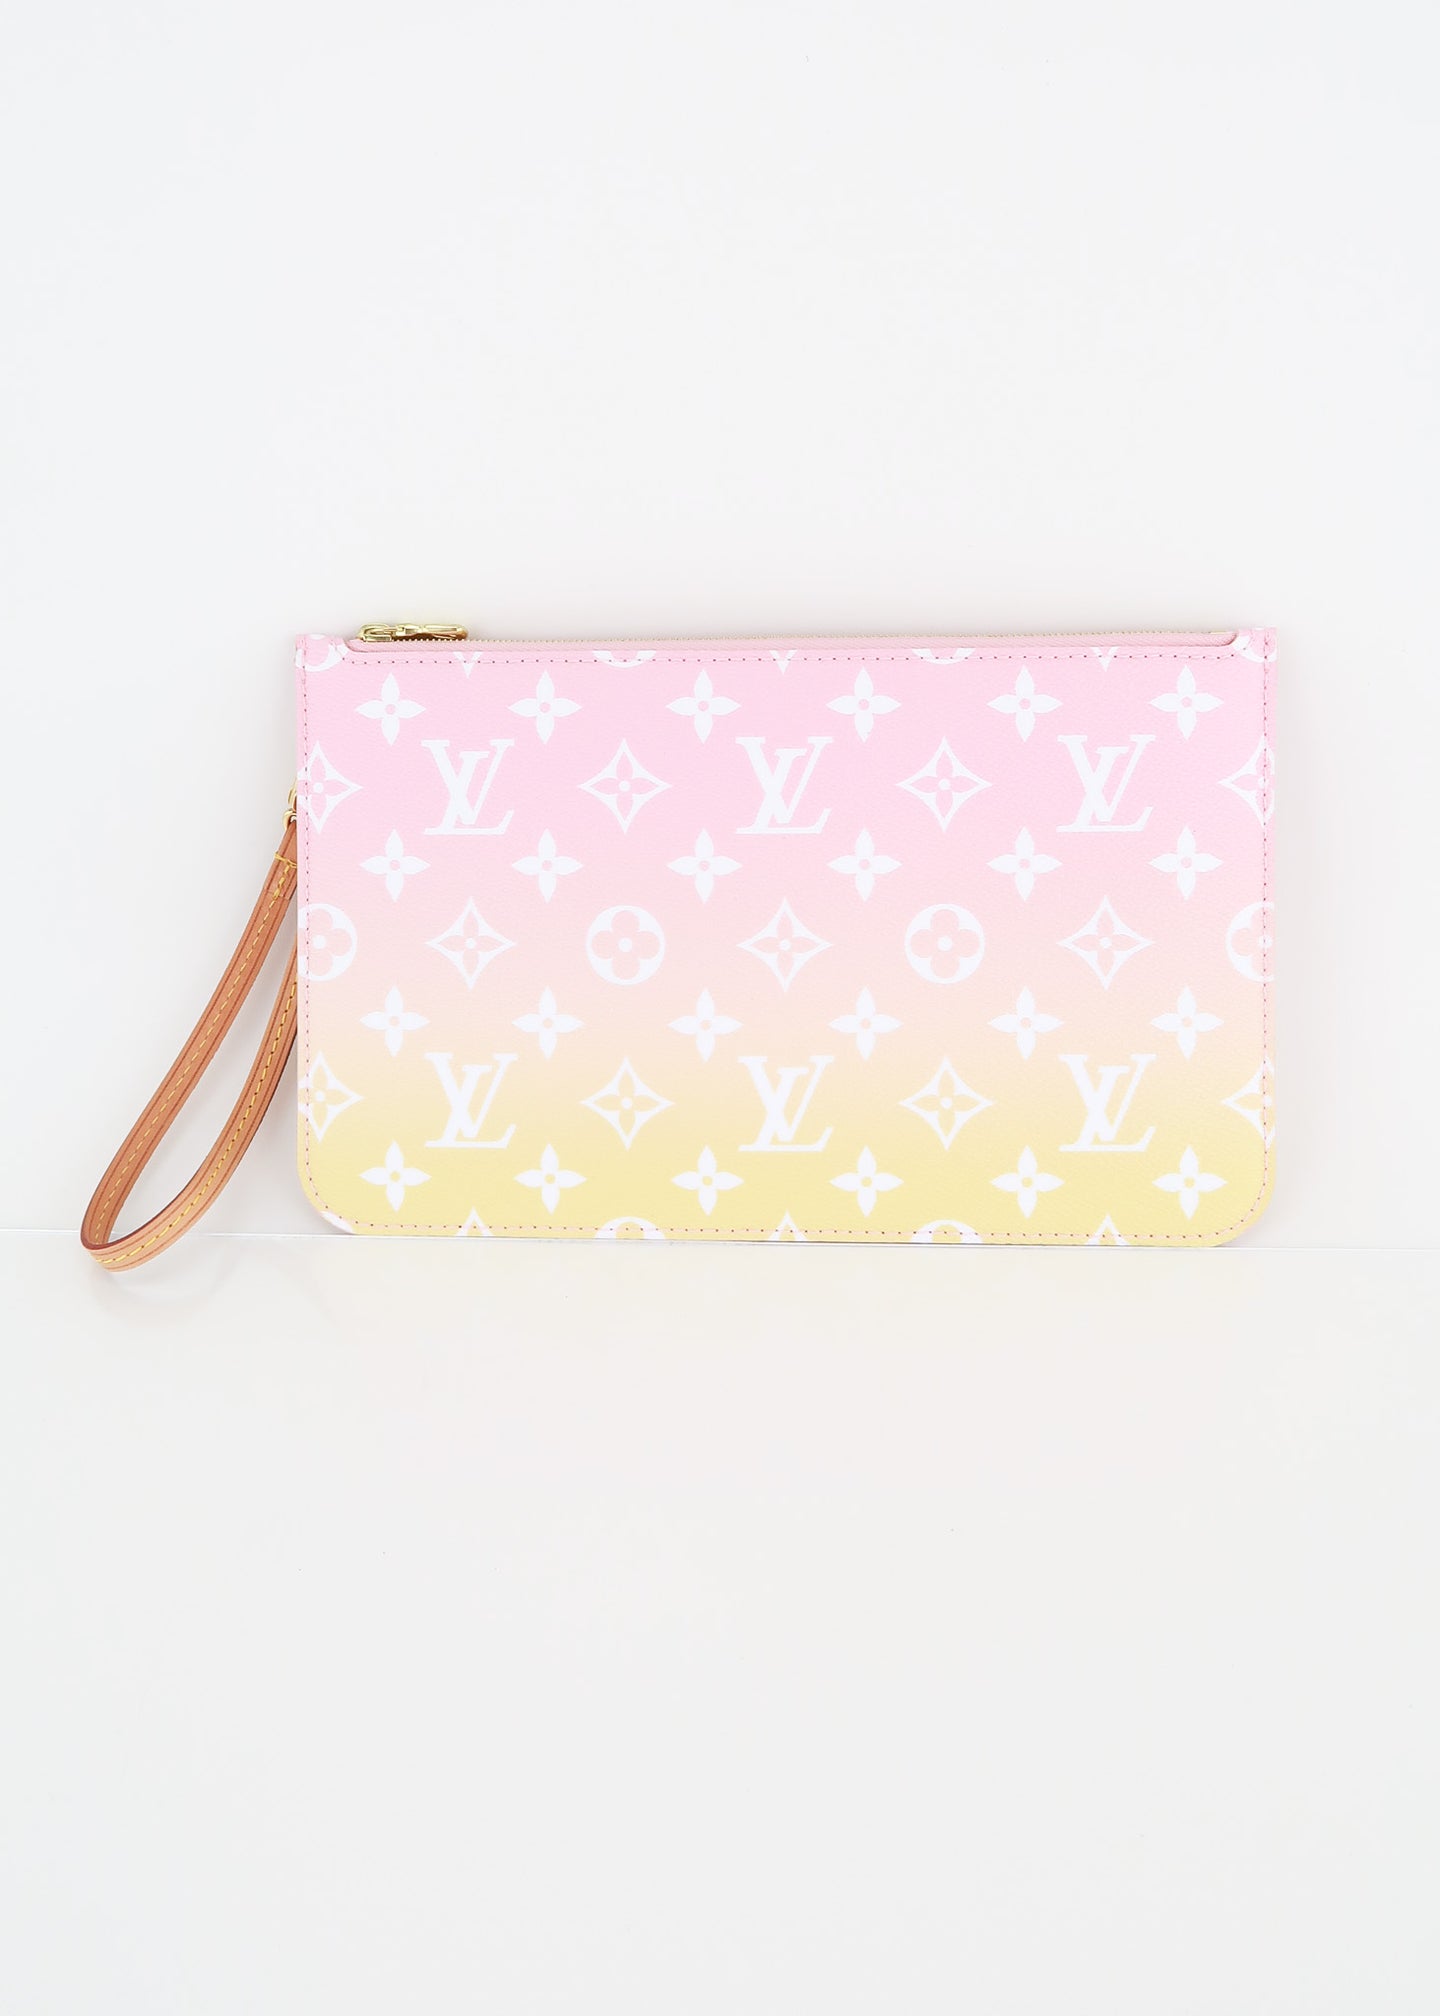 Louis Vuitton Pink Yellow Monogram Giant By The Pool, 40% OFF